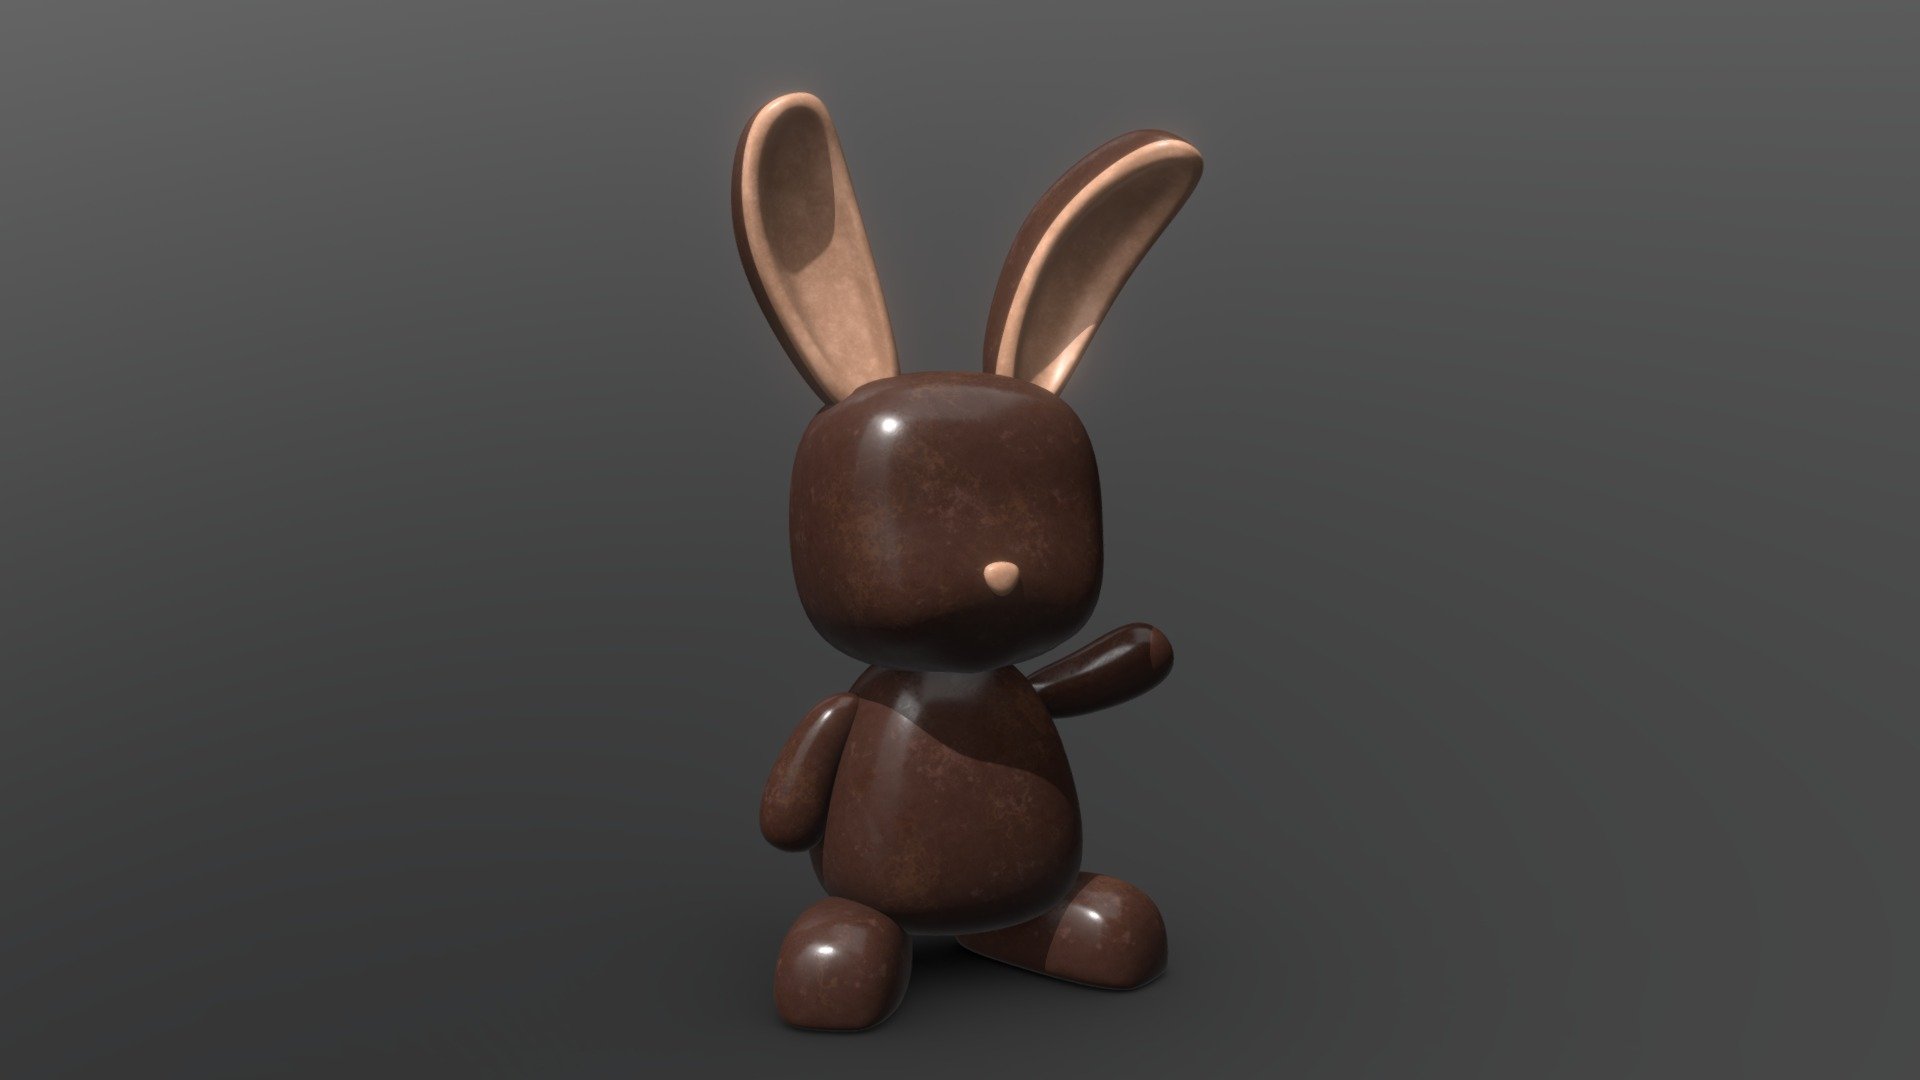 Easter2020Challenge
Chocolate Easter Bunny for Sketchfab Texturing Challenge: Easter Bunny
Made in Substance Painter

Based on &ldquo;Easter Challenge Bunny